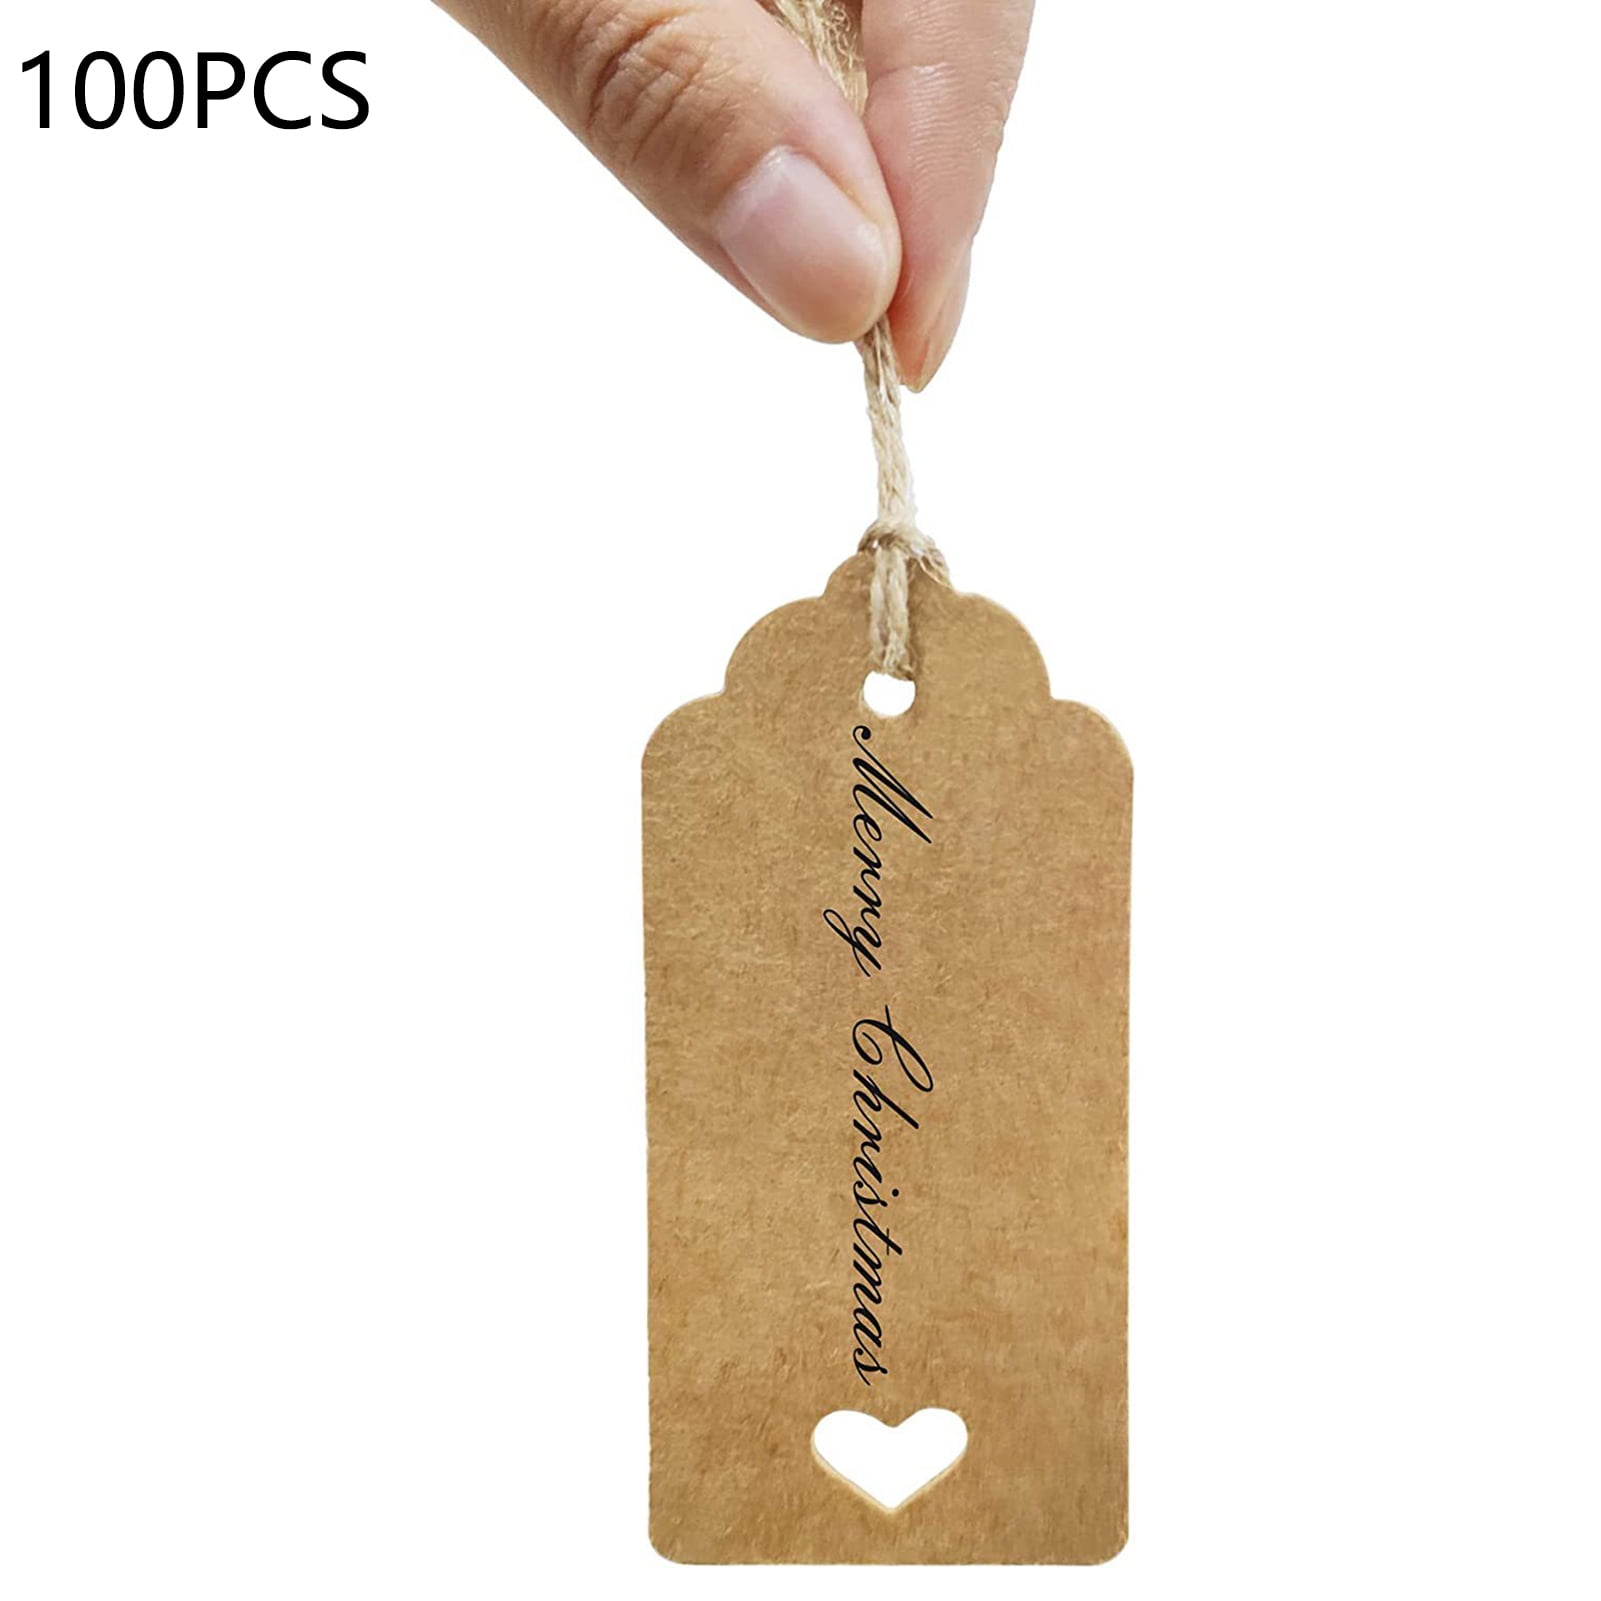 BeGrit Personalized Kraft Paper Tag Gift Tags DIY Craft Price Tags 100 PCS  Brown for Wedding Party Favors Baby Shower Birthday Christmas with Bonus 33